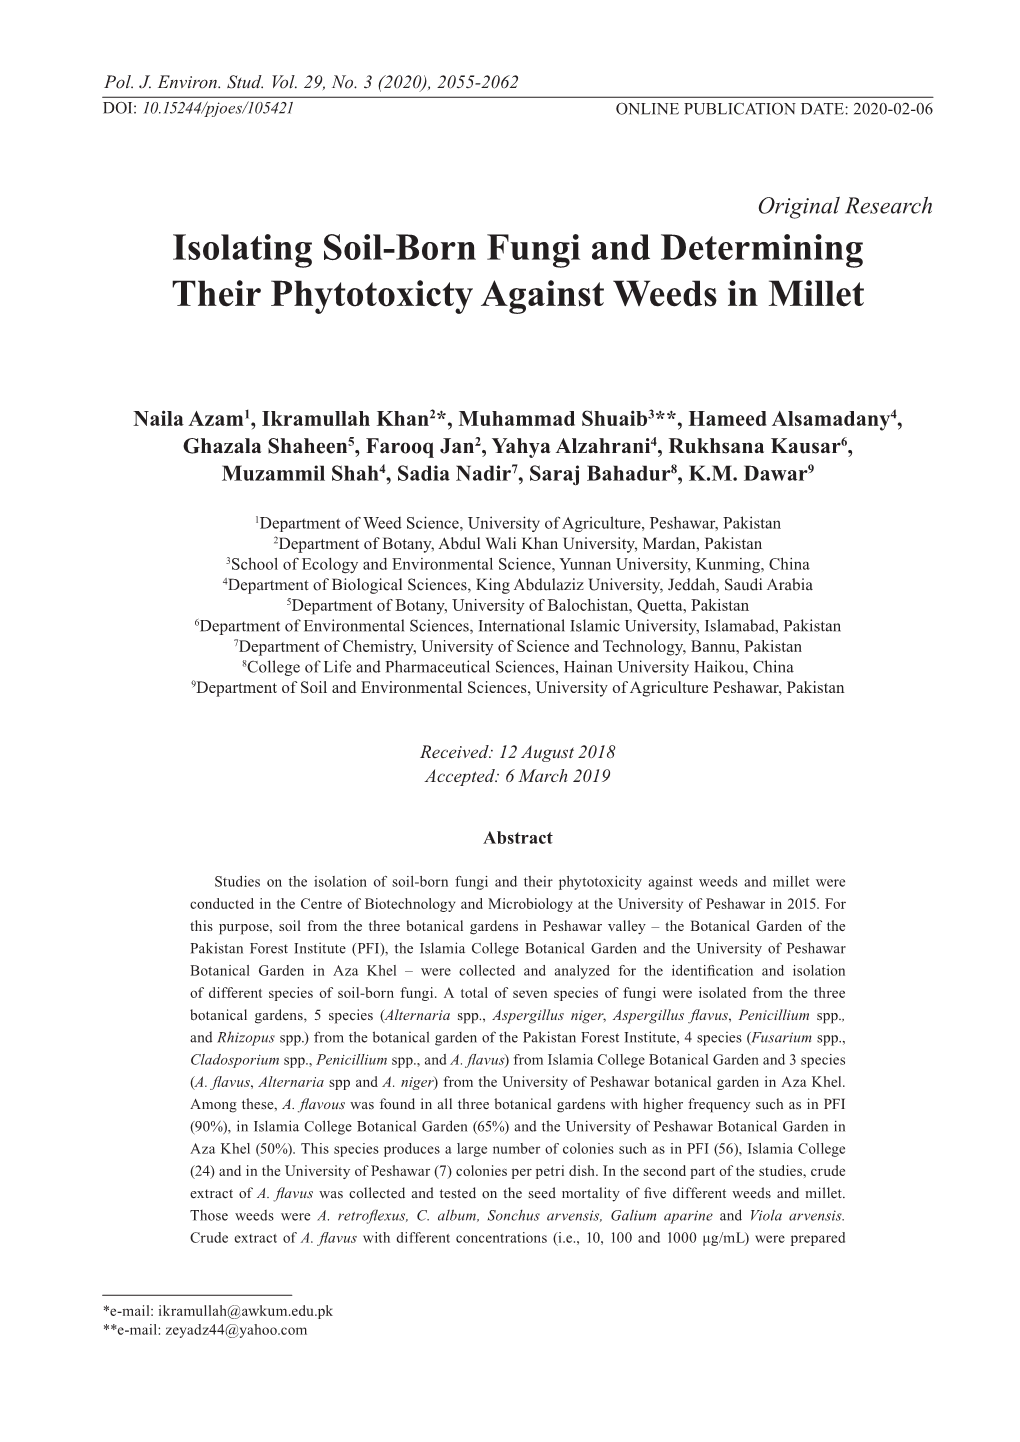 Isolating Soil-Born Fungi and Determining Their Phytotoxicty Against Weeds in Millet